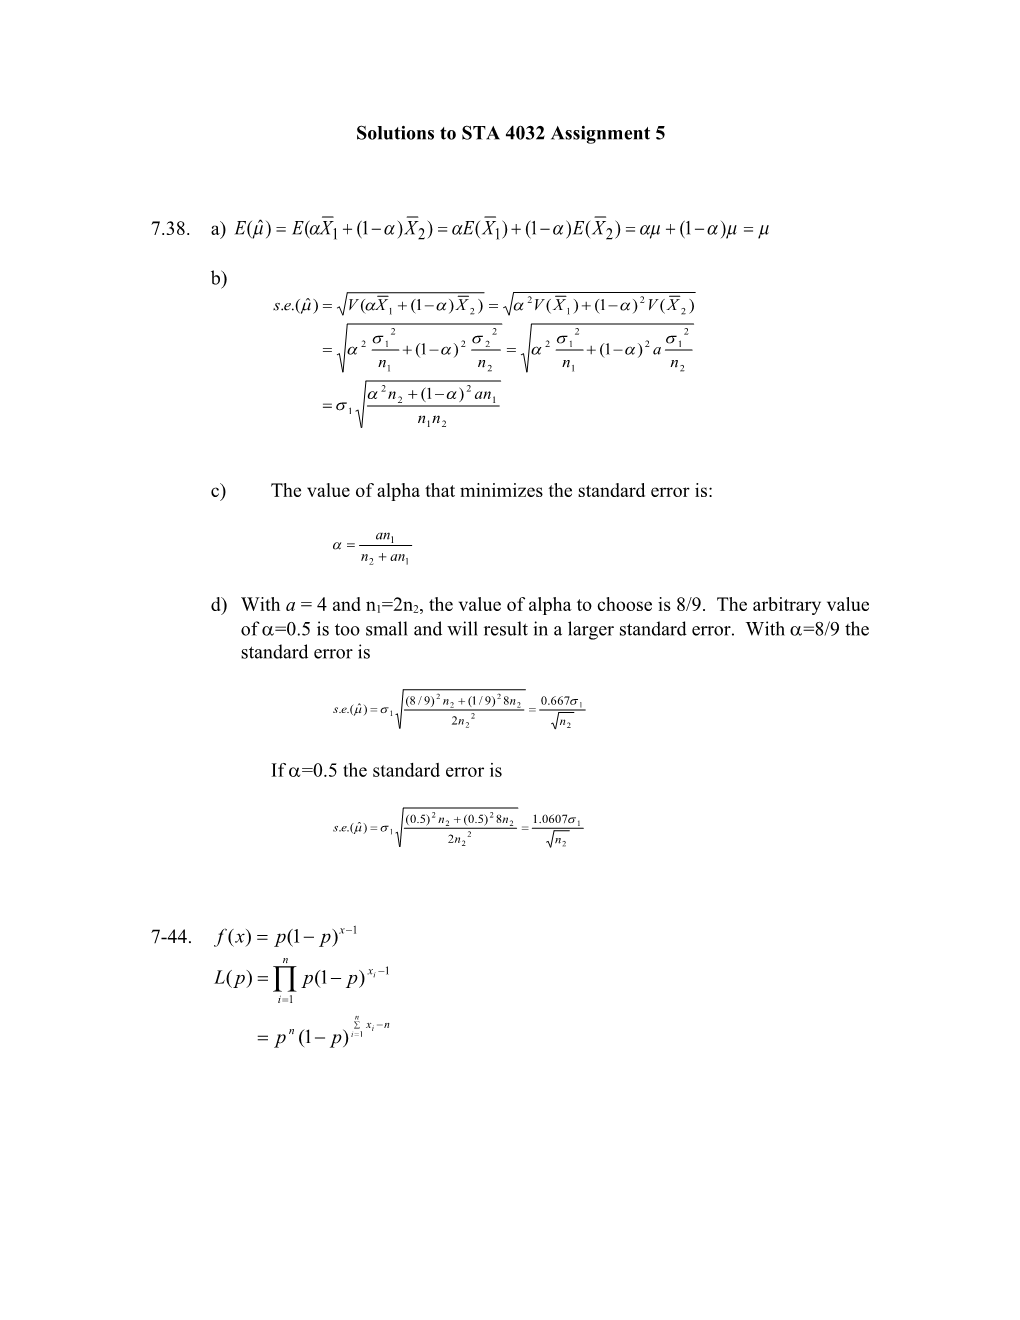 Solutions to STA 4032 Assignment 4